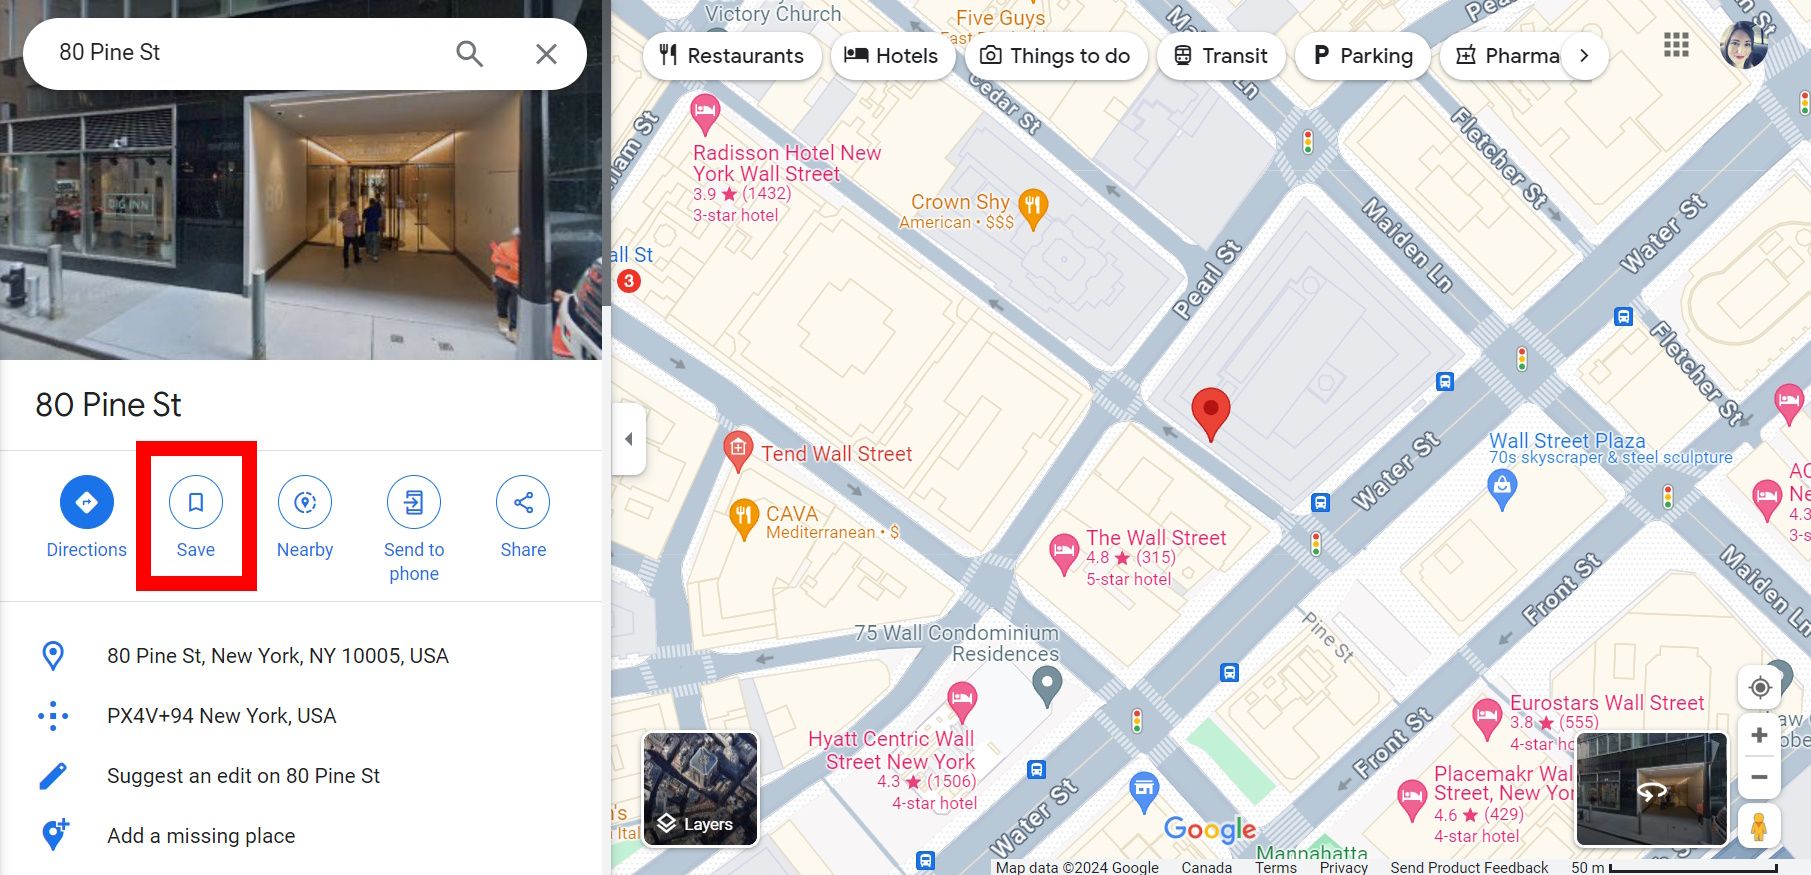 red rectangle outline over save button on left menu in google maps